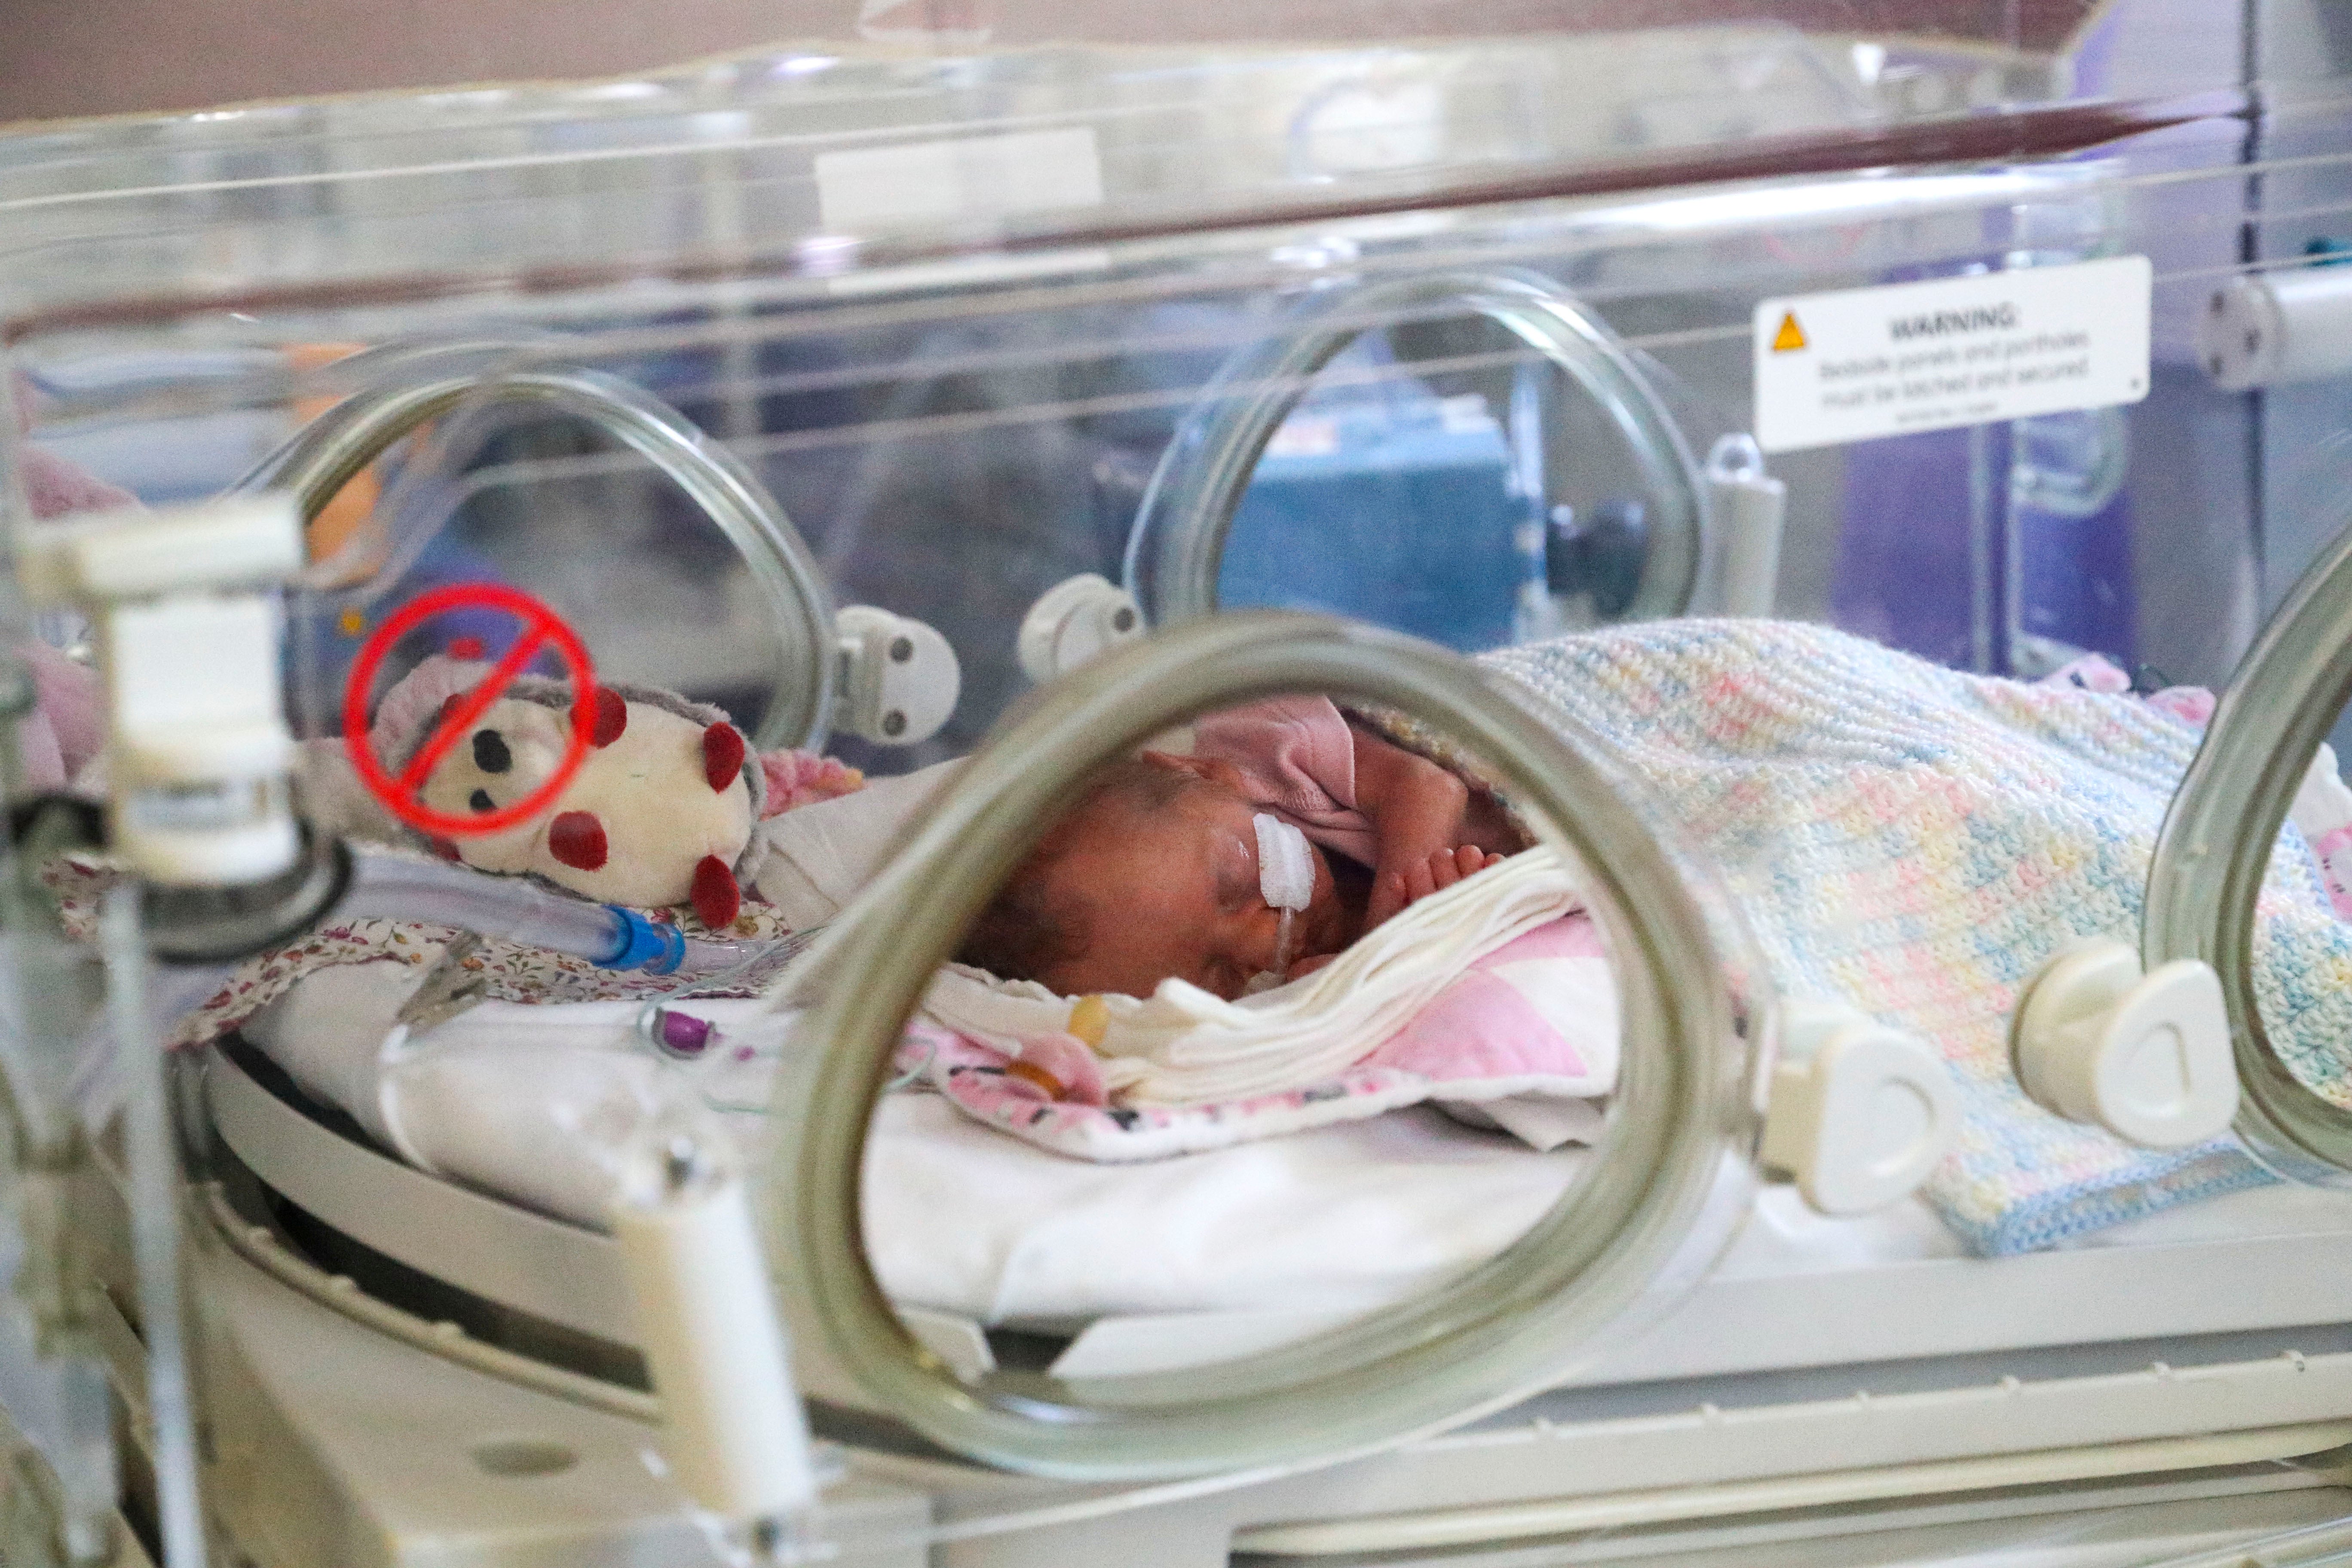 More than 250,000 babies were born into toxic air in 2019, say researchers.